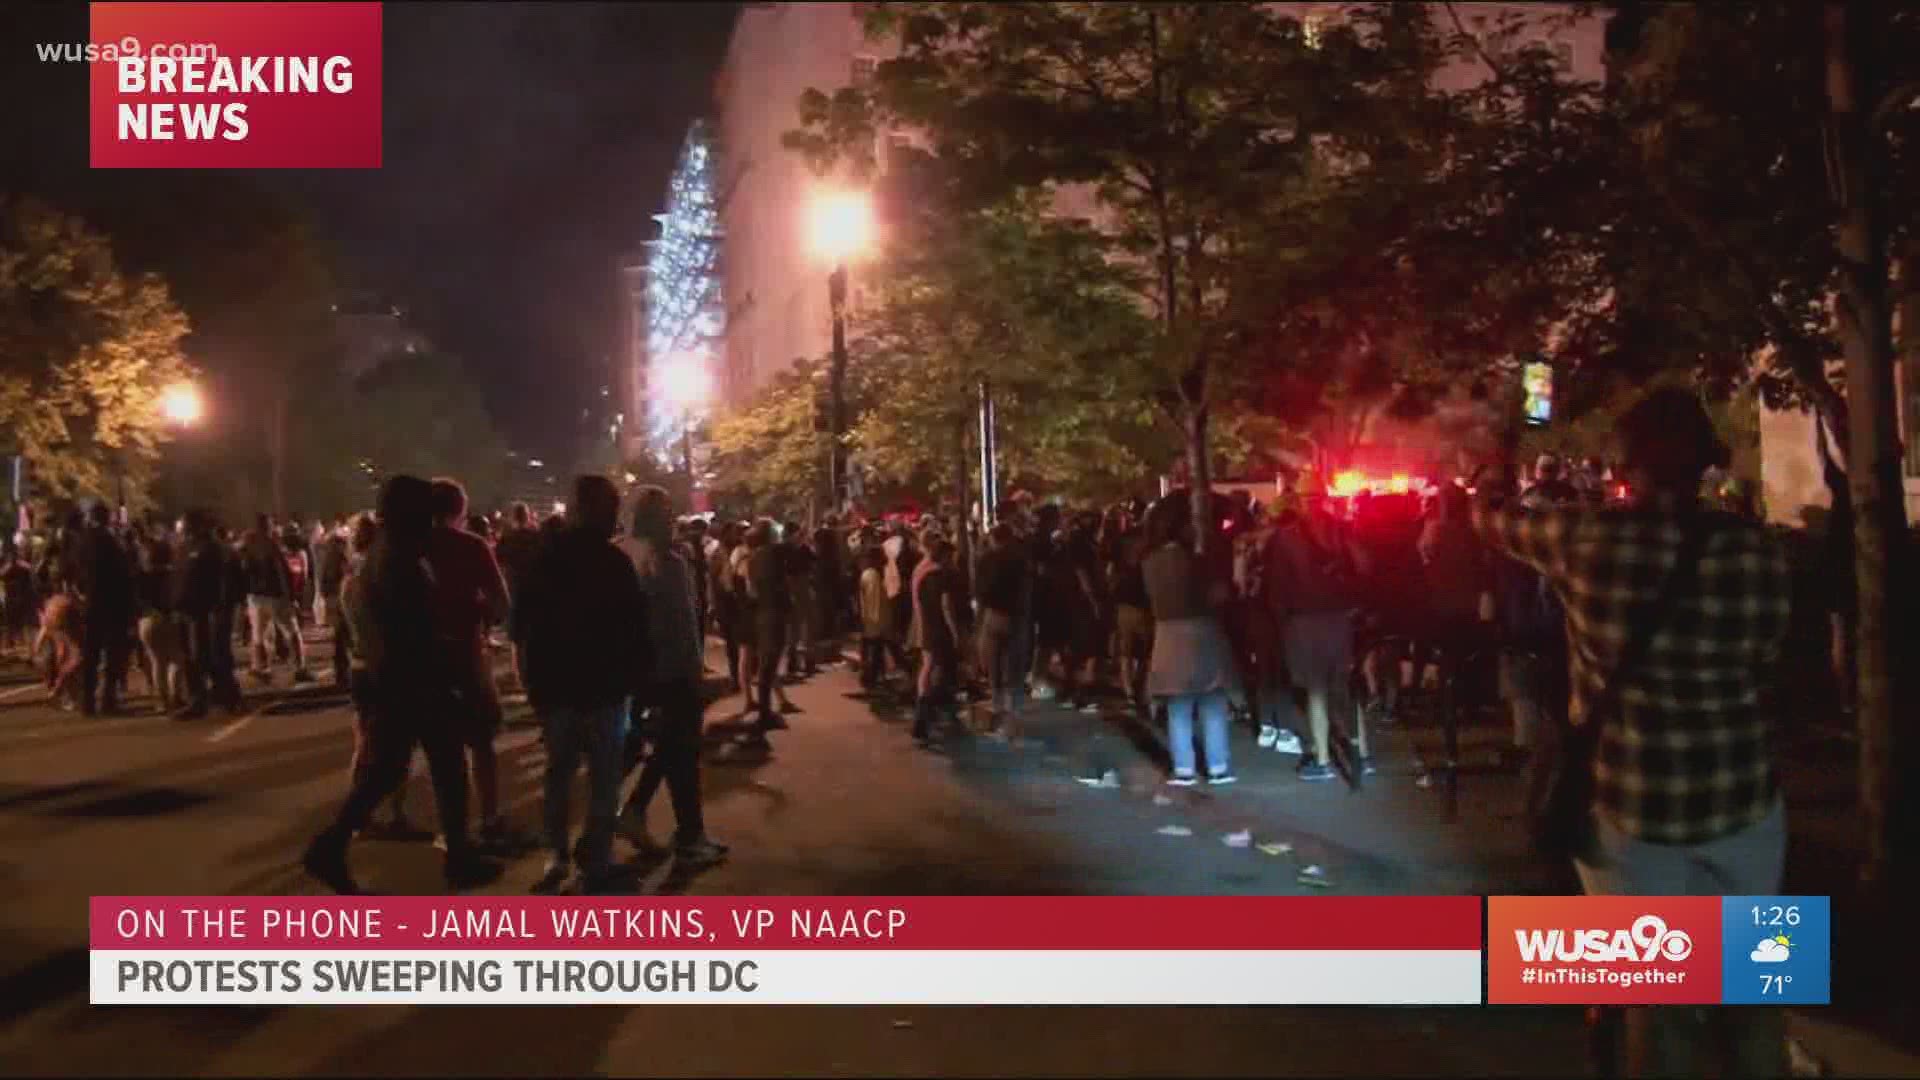 Jamal Watkins, Vice President of NAACP told WUSA9 shared his thoughts on the protests at the nation's capital.